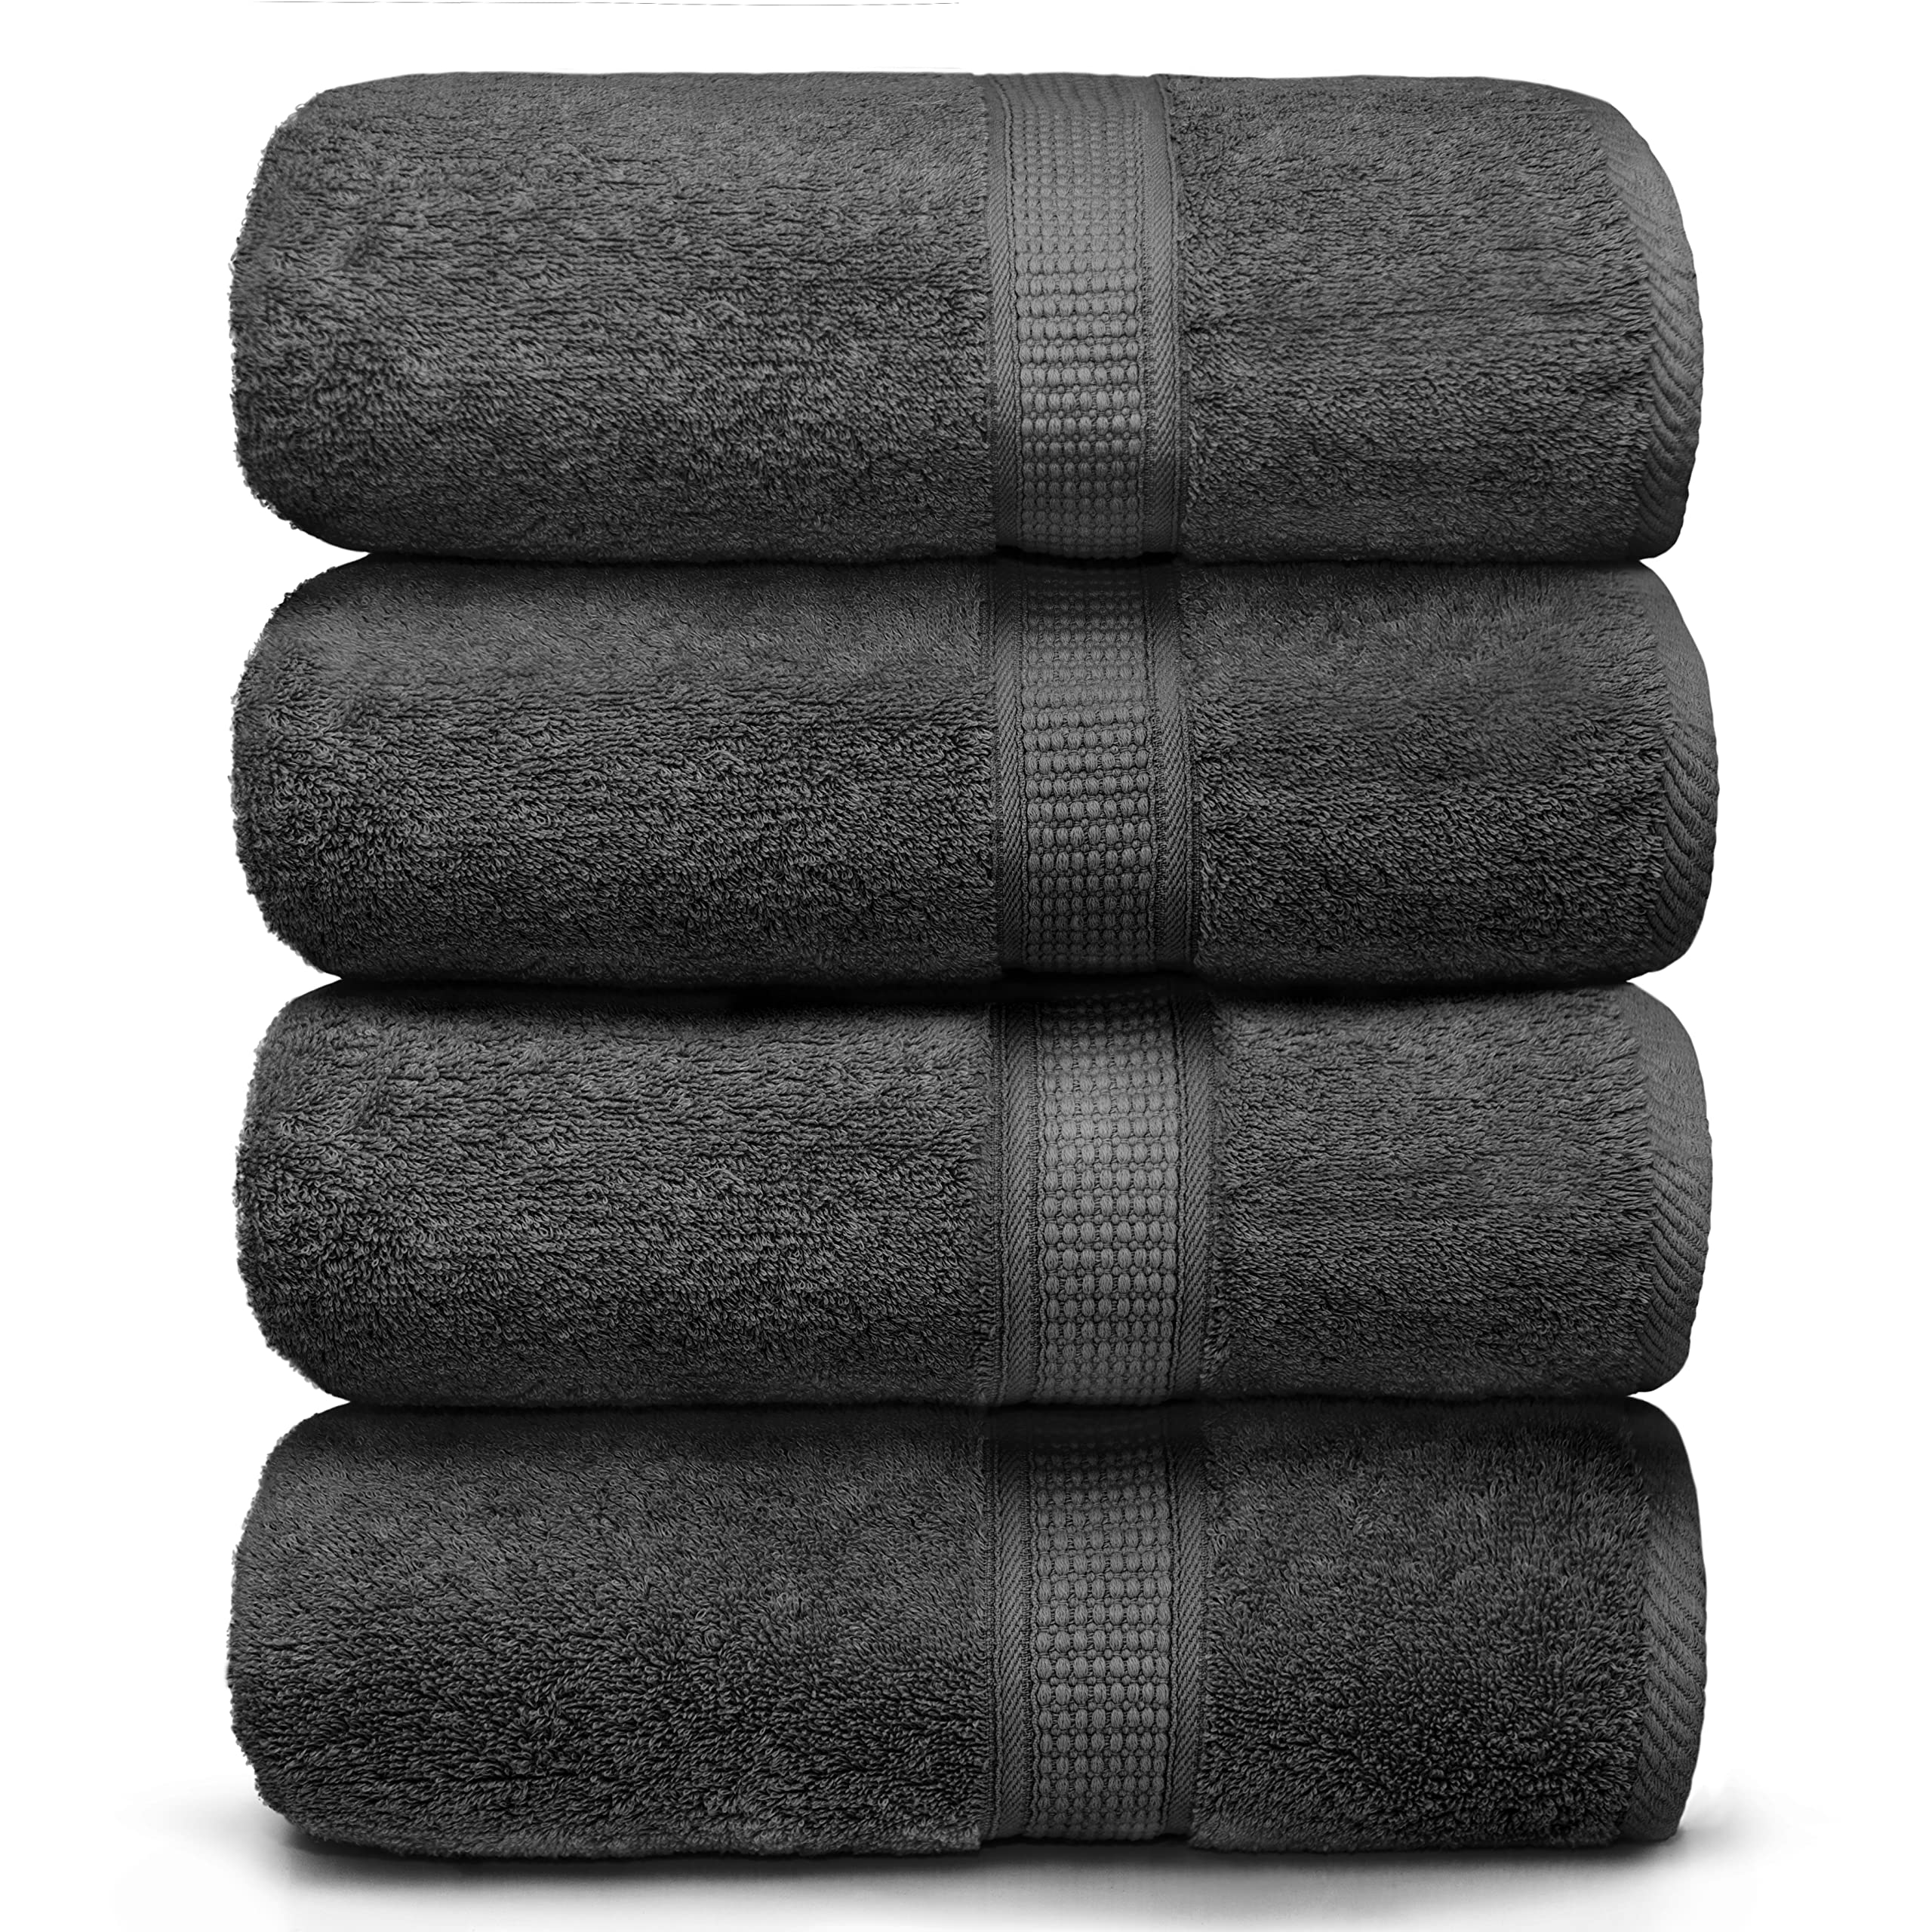 Book Cover Ariv Towels 4-Piece Large Premium Bamboo Cotton Bath Towels Set - Suitable for Sensitive Skin & Daily Use - Soft, Quick Drying & Highly Absorbent Towels for Bathroom, Gym, Hotel & Spa - 30